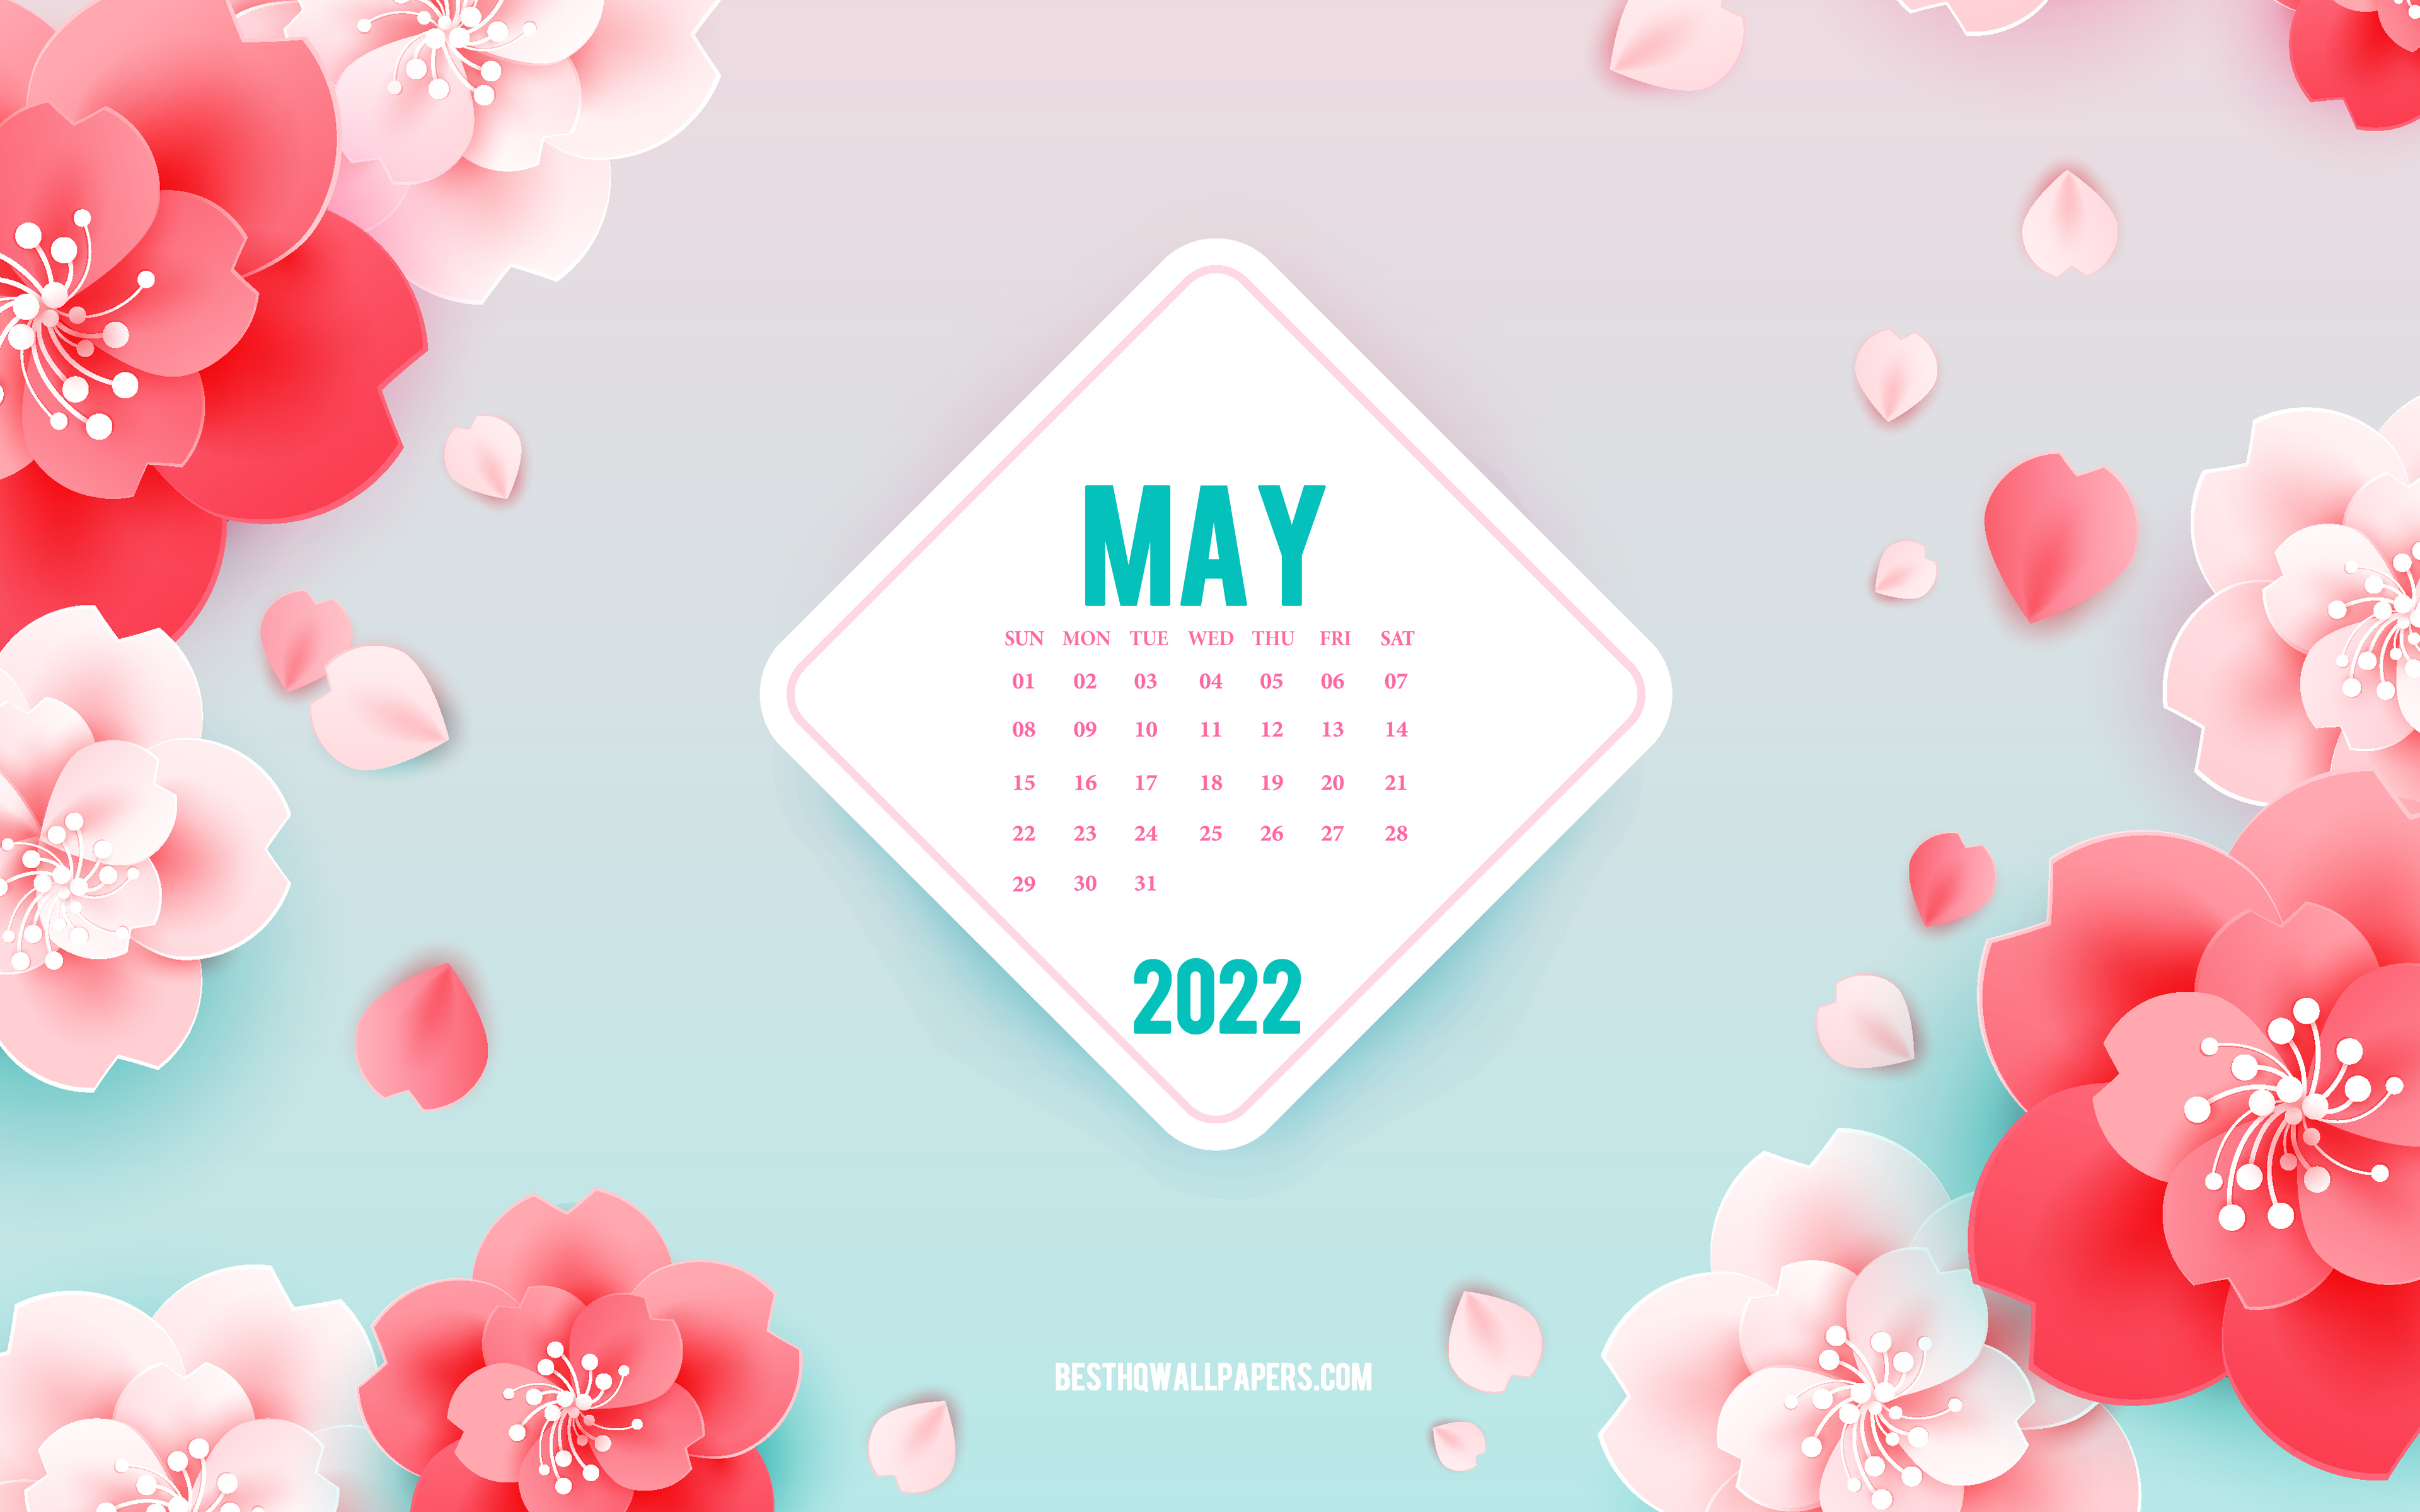 Download wallpapers 2022 May Calendar, 4k, pink flowers, May, spring art, 2022 spring calendars, spring backgrounds with flowers, May 2022 Calendar, paper flowers for desktop with resolution 3840x2400. High Quality HD pictures wallpapers